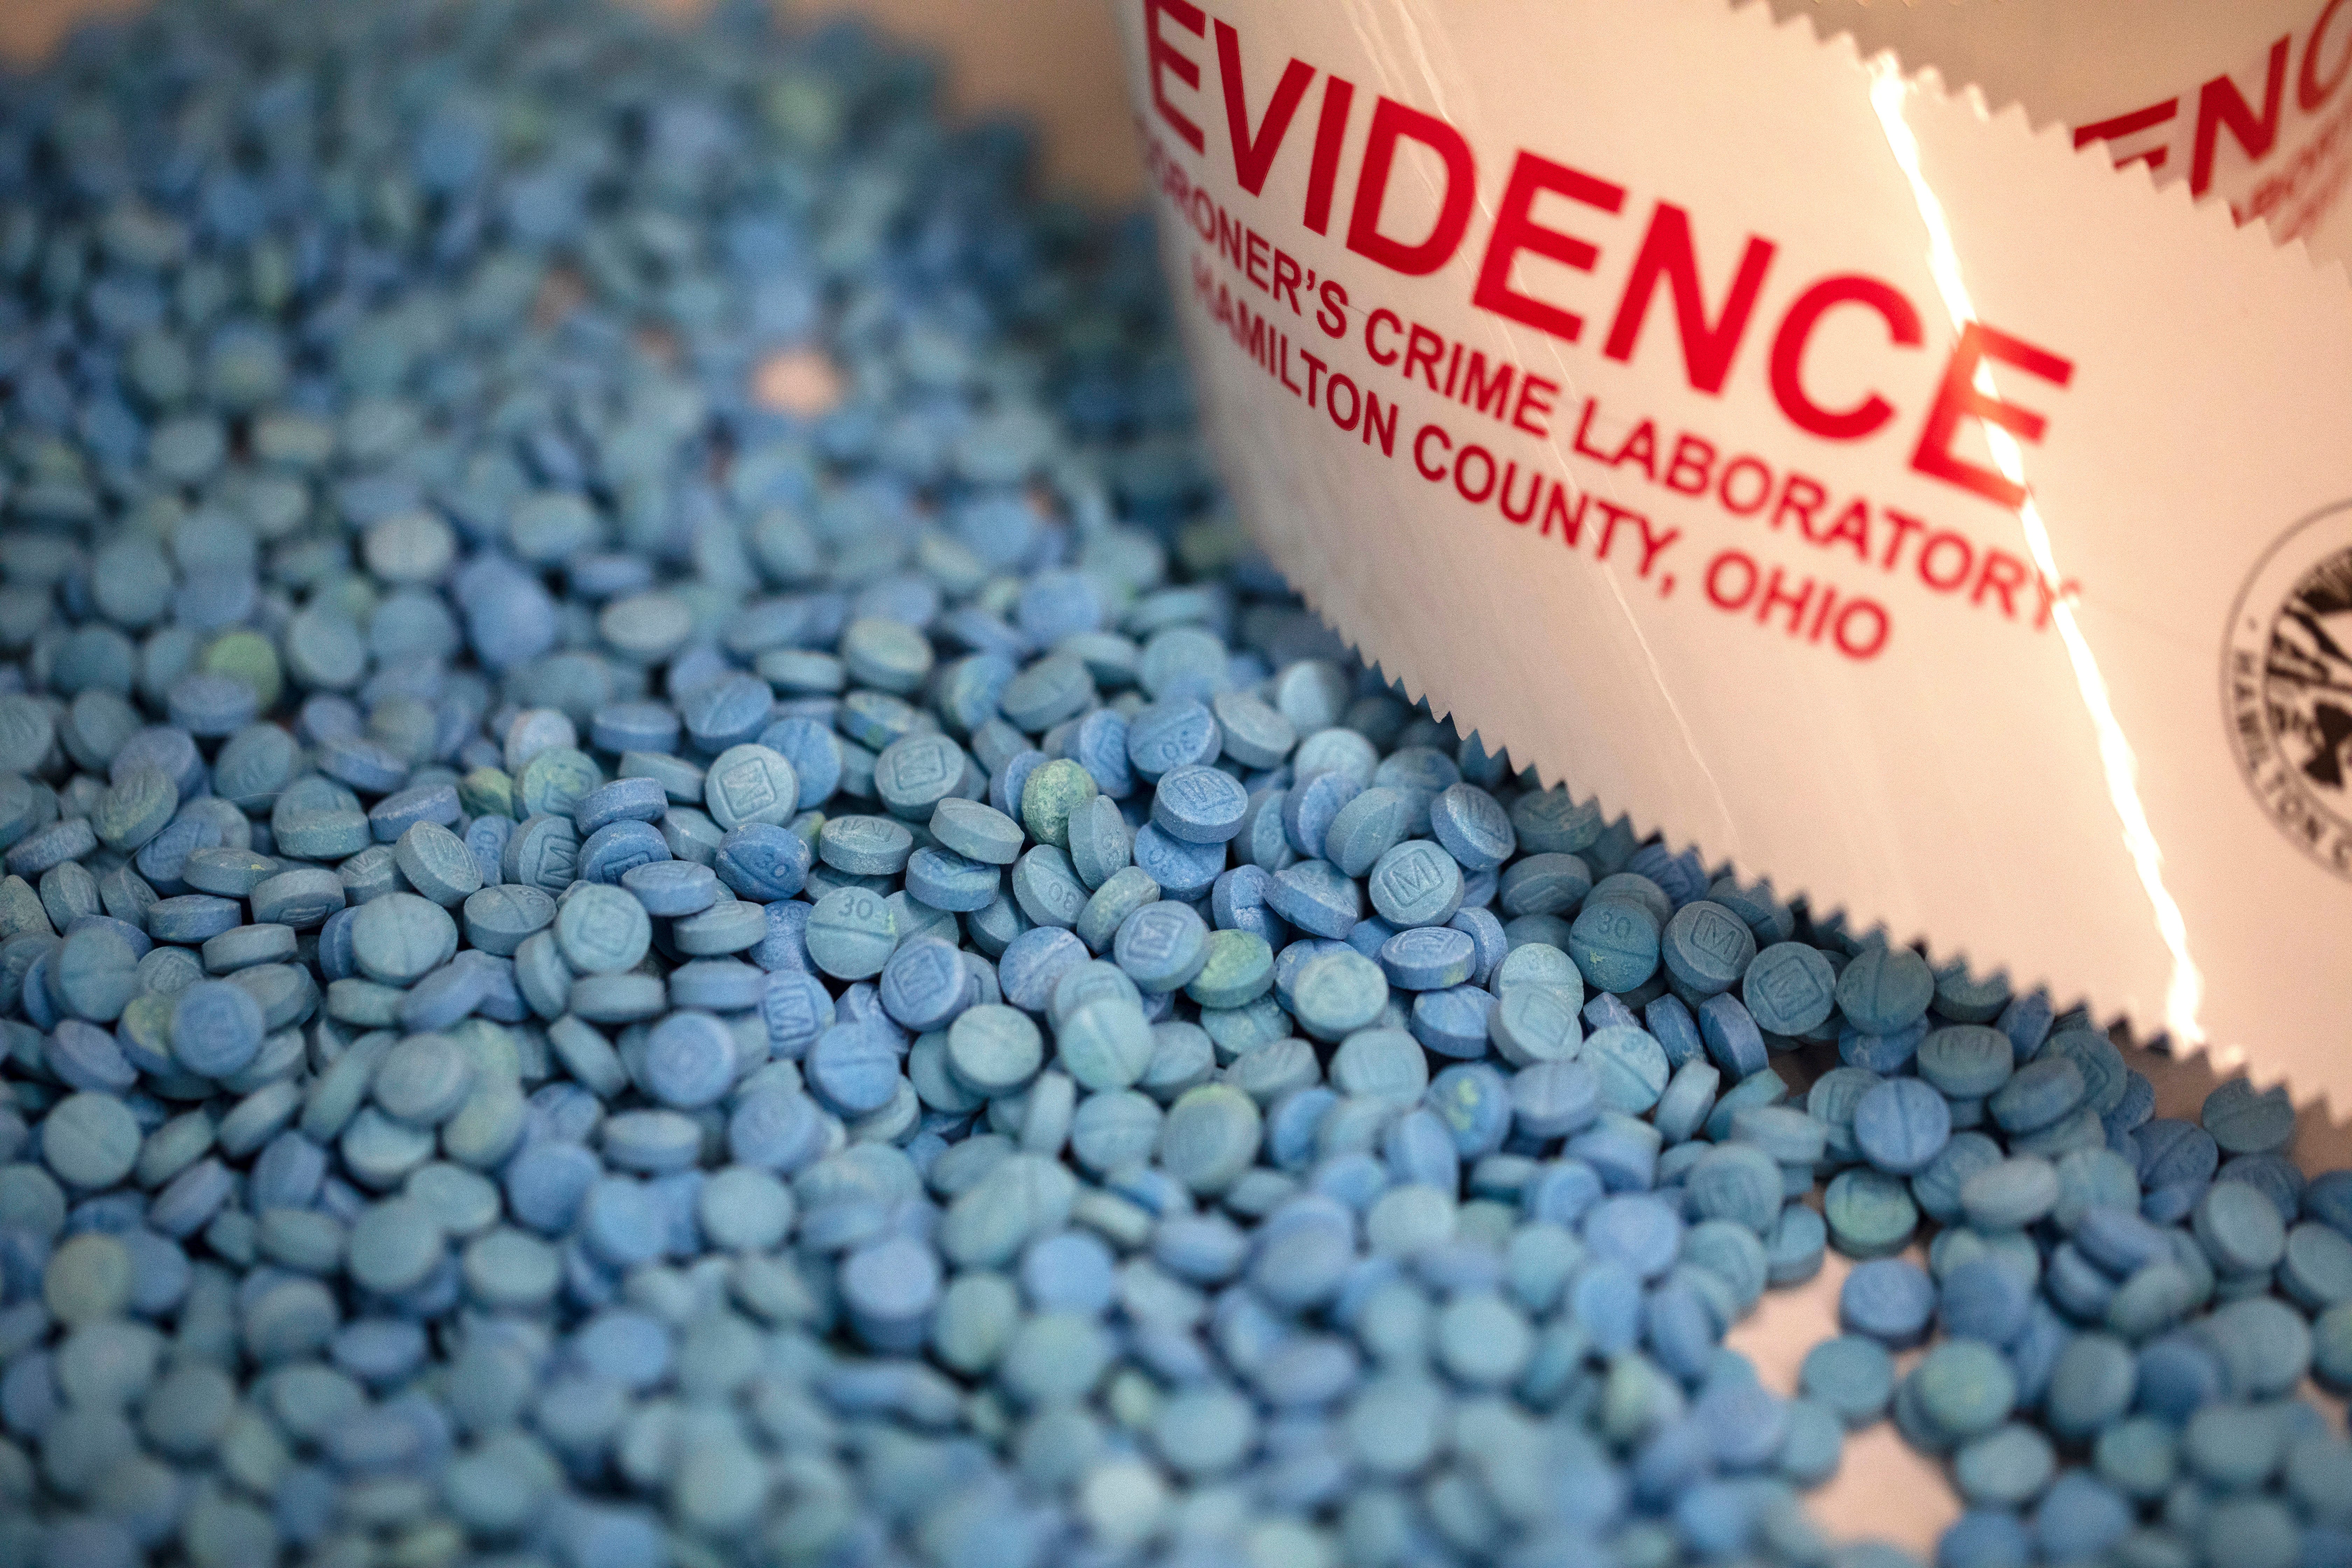 Laura Kimble, senior drug chemist and forensic scientist with the Hamilton County Coroner's Crime Laboratory located in Blue Ash, shows some of the fake oxycodone that was seized in a large drug bust. The fake pills contain fentanyl and acetaminophen.